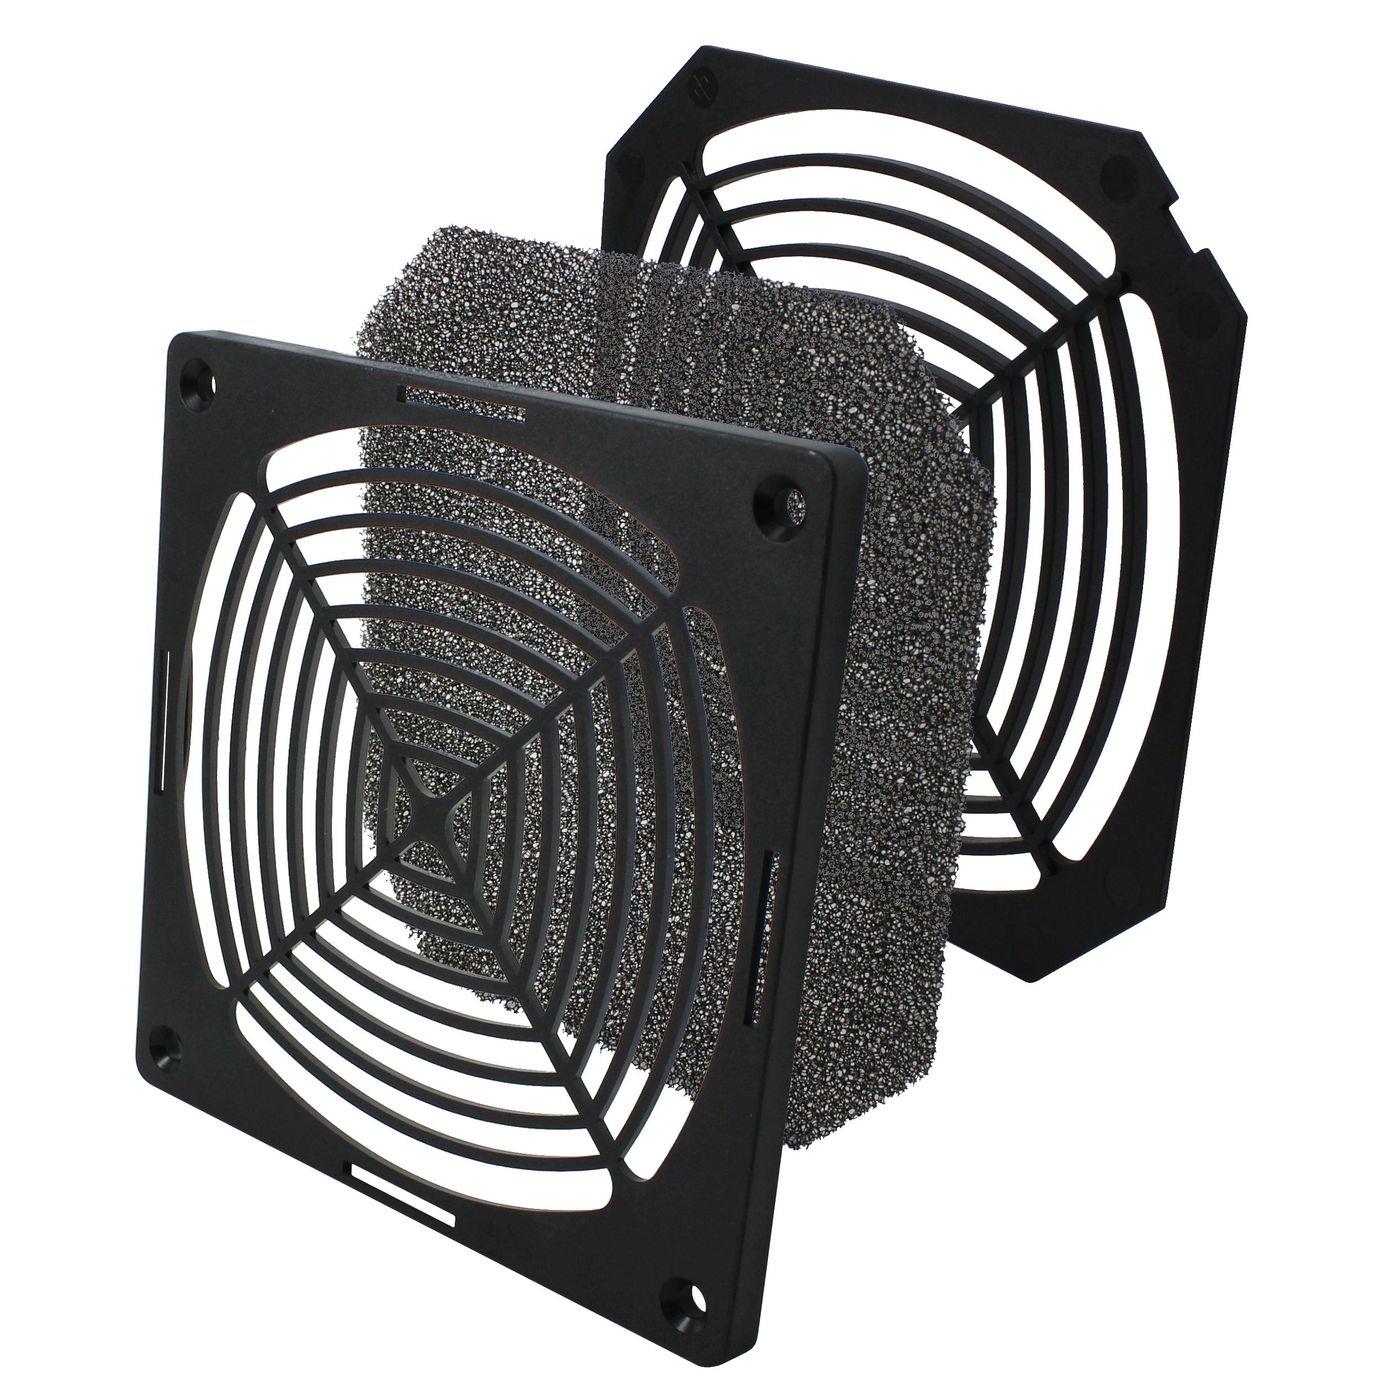 Plastics Fan grille with Filter element 120x120mm 120mm